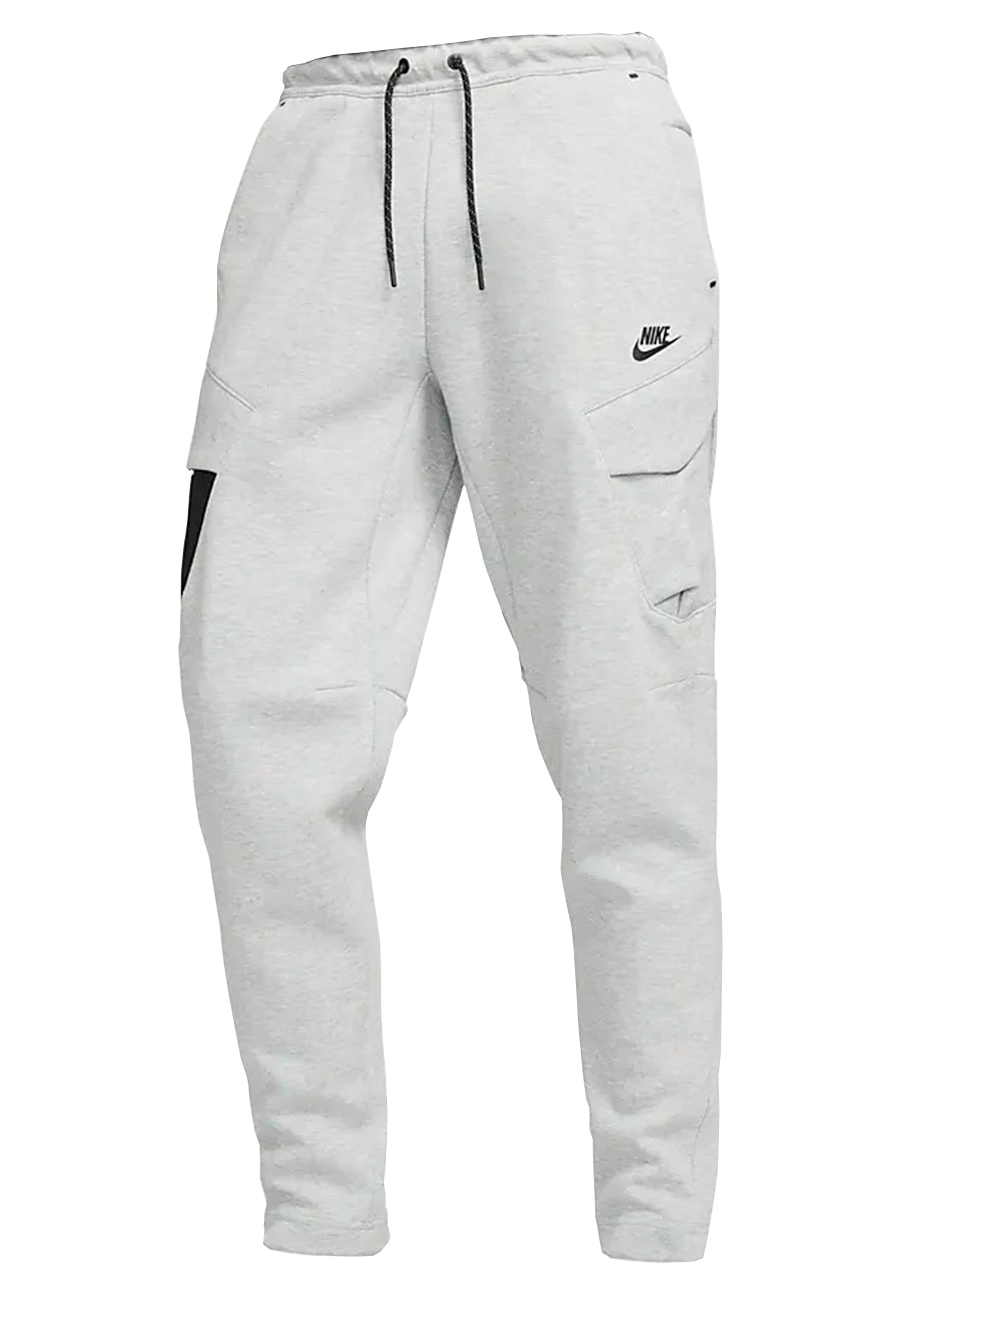 Nike Sportswear Trousers | Where To Buy | DO0022-113 | The Sole Supplier